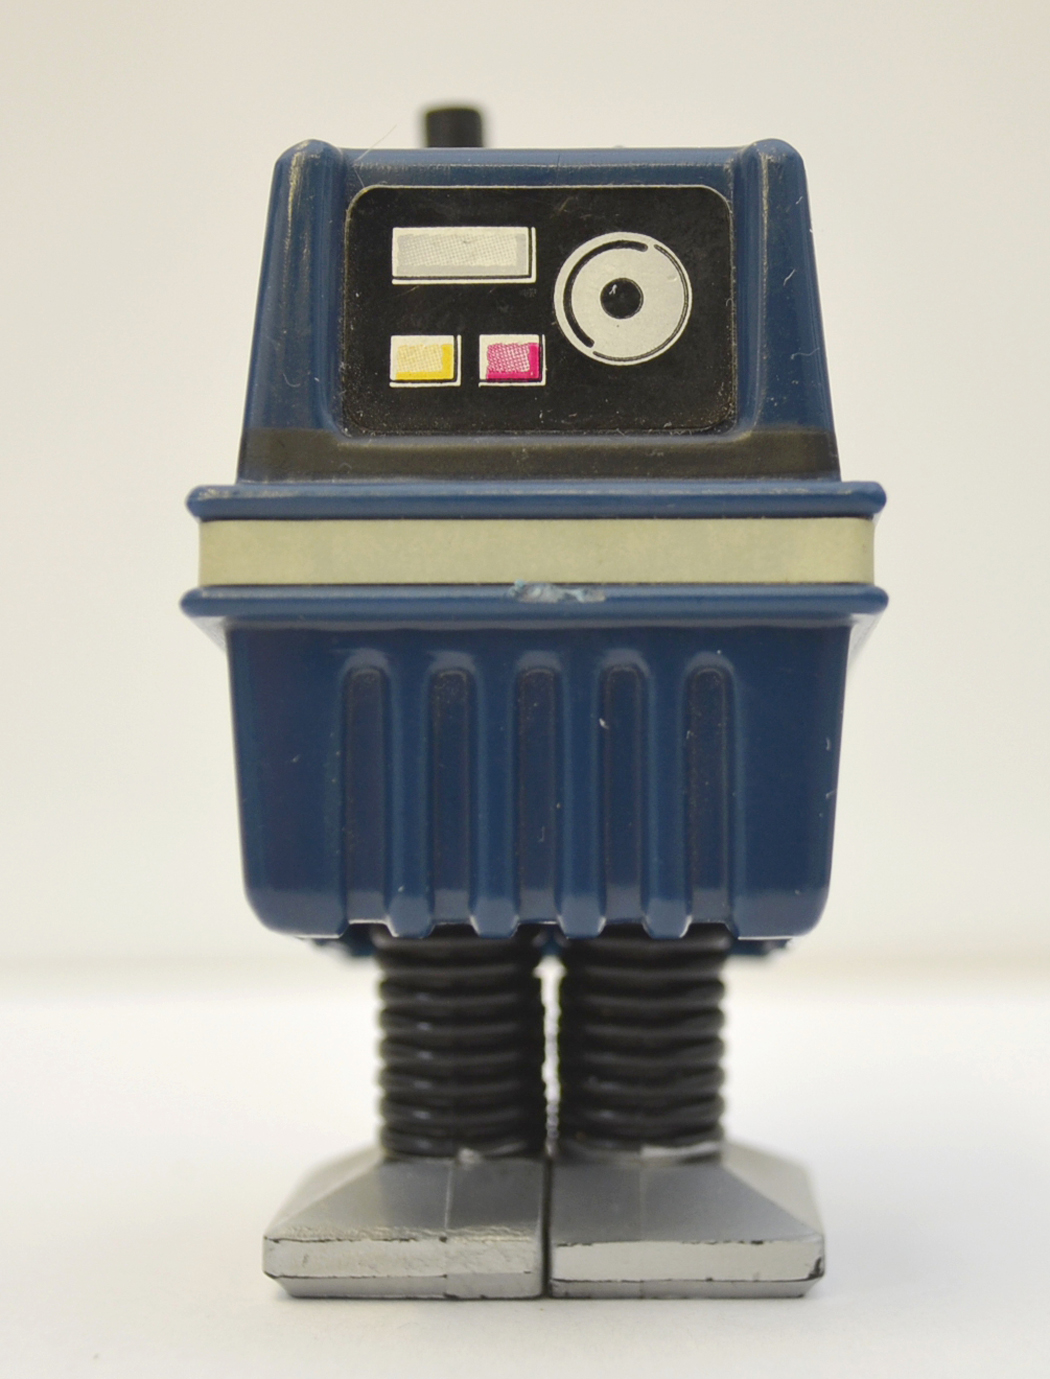 Star wars vintage stickers repro Power droid figurine 